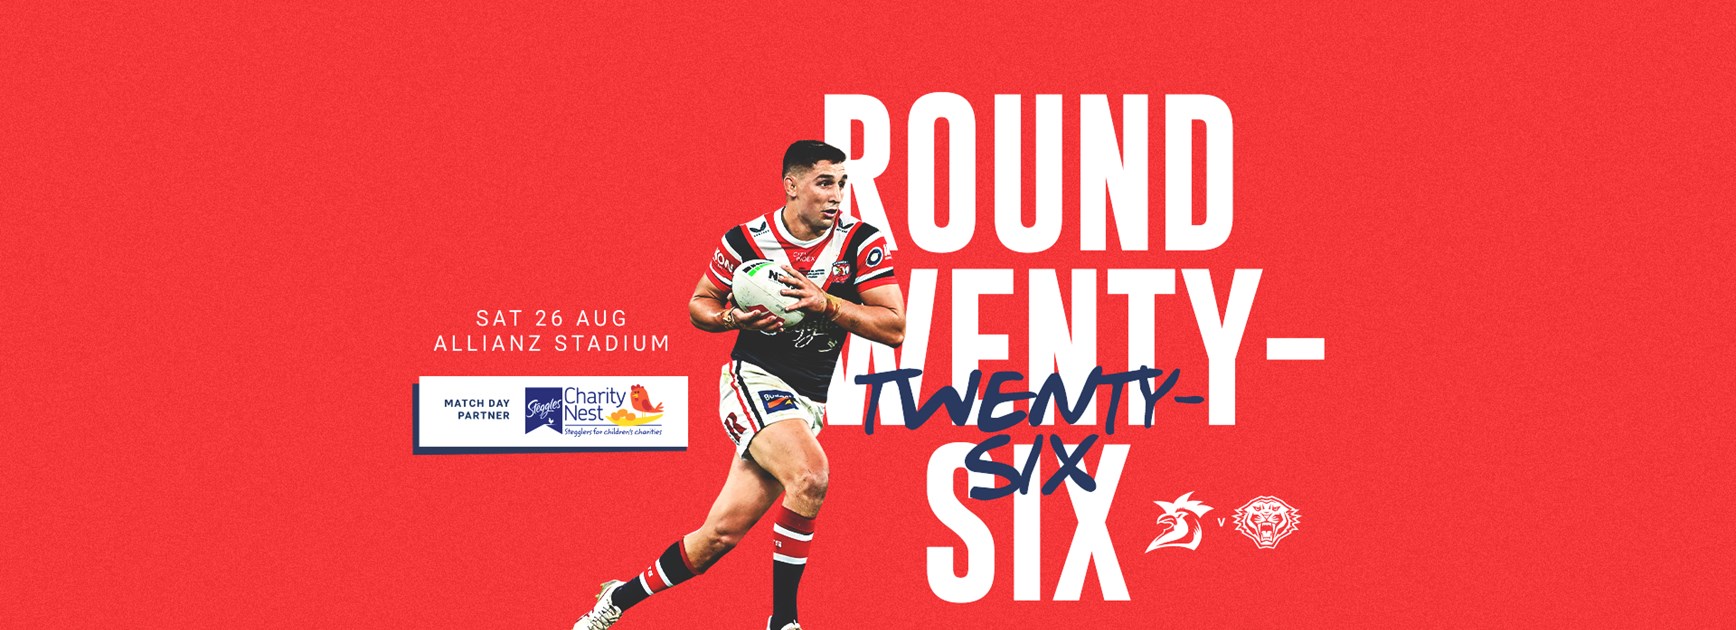 NRL Line Up for Round 26 vs Tigers